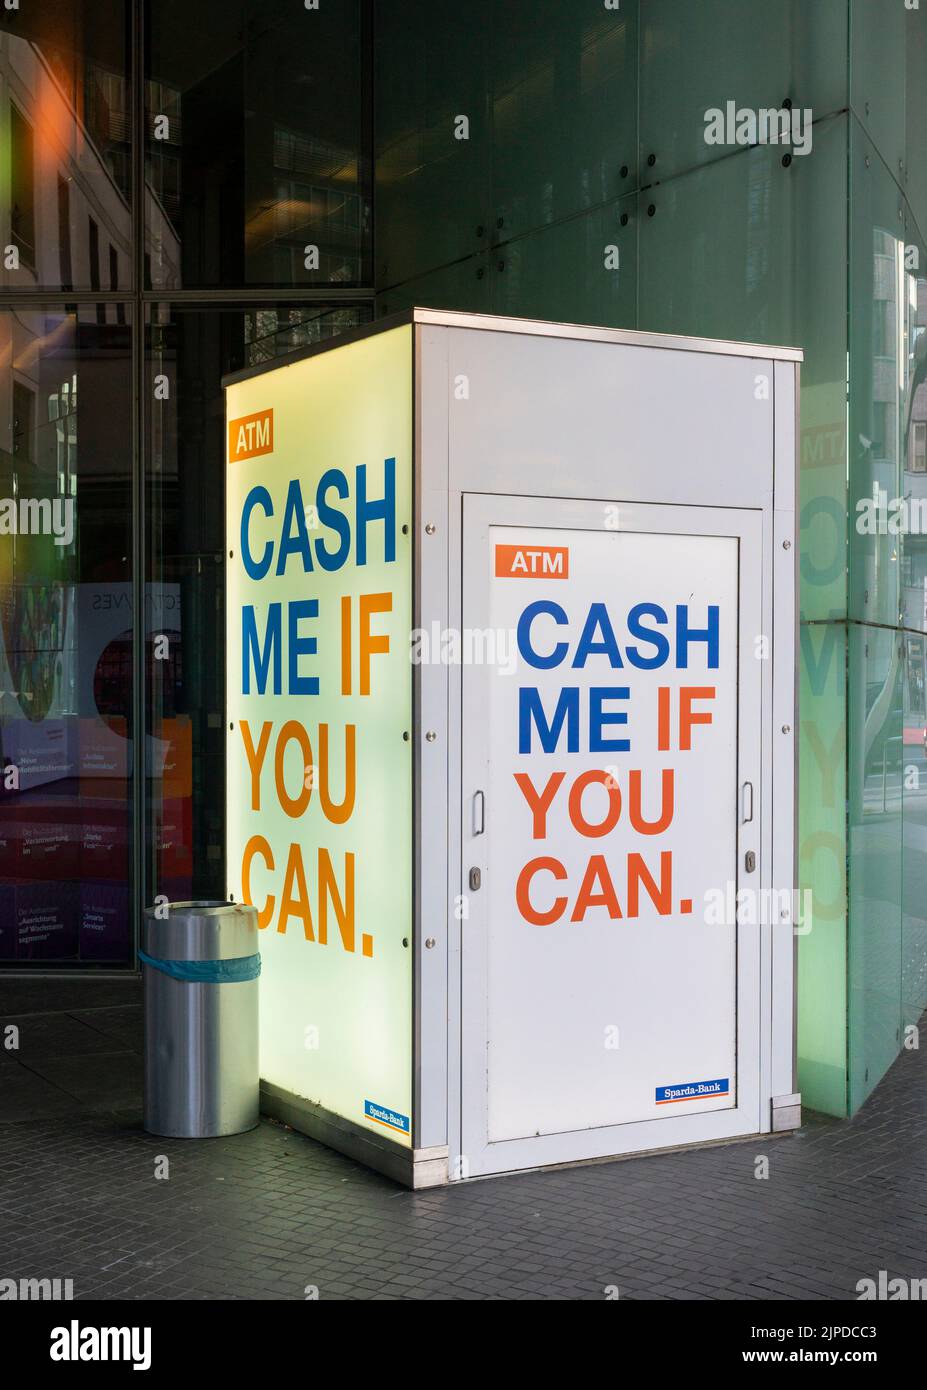 atm, cash me if you can, bankautomat, atms Stock Photo